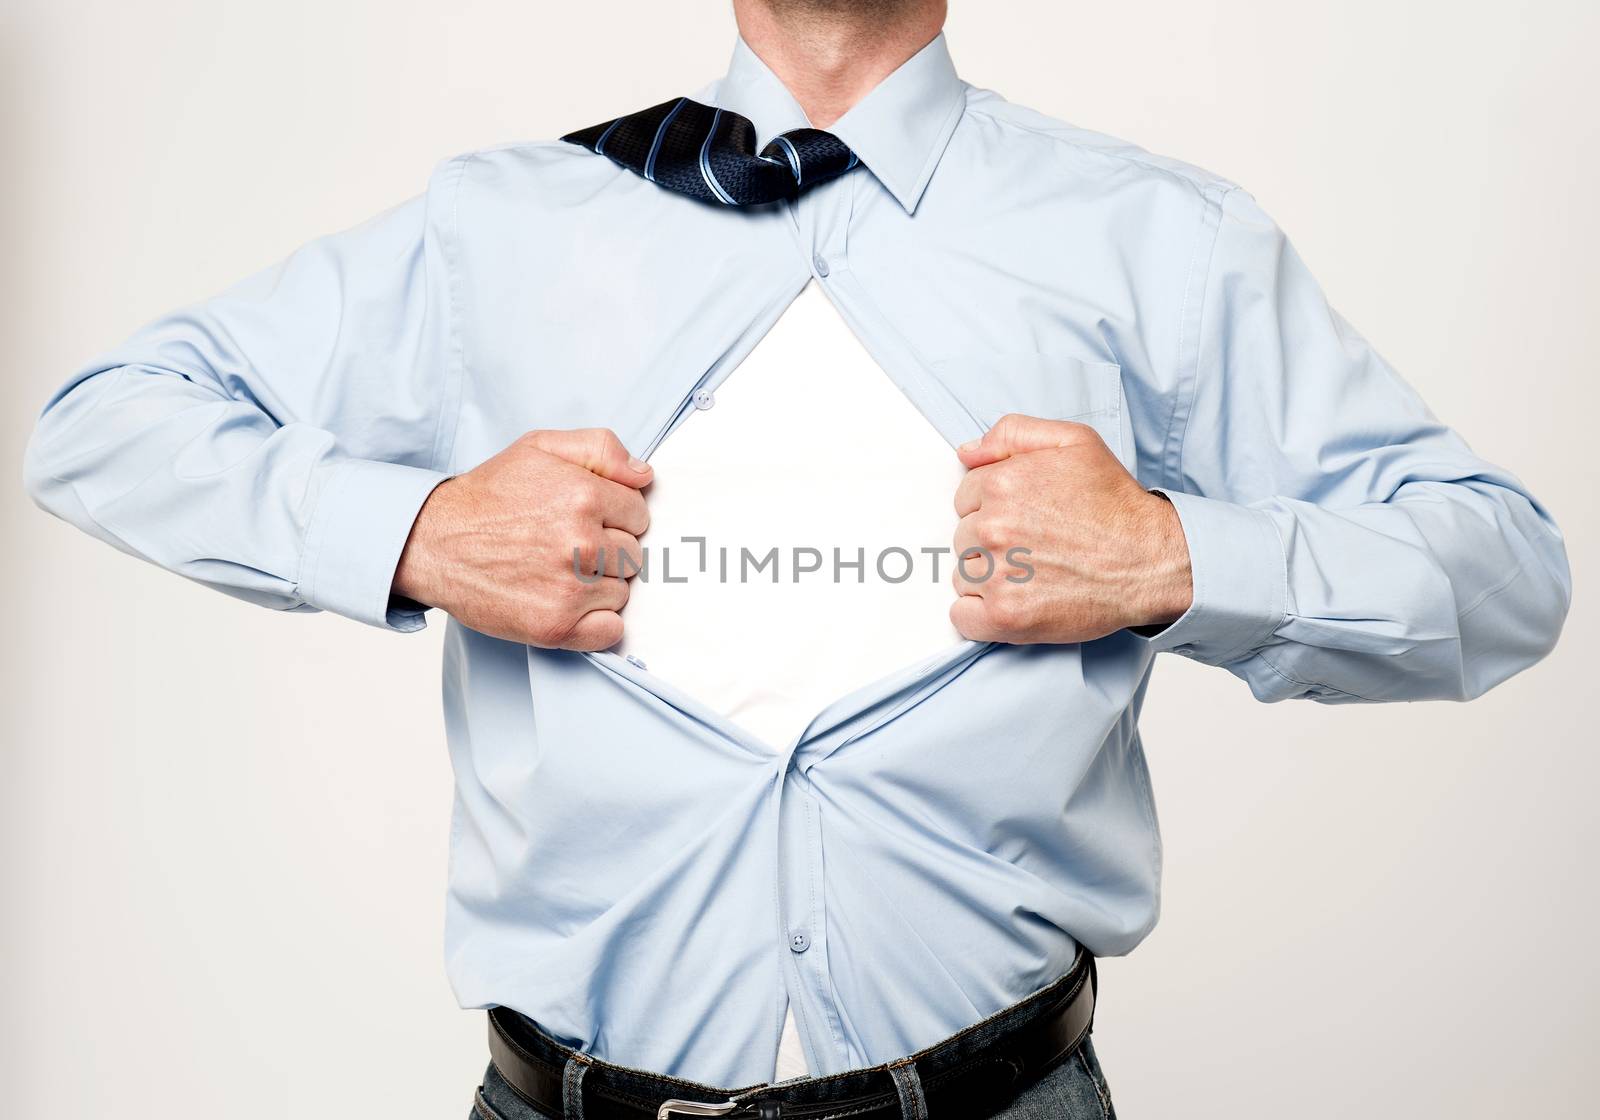 Superhero executive tearing his shirt by stockyimages